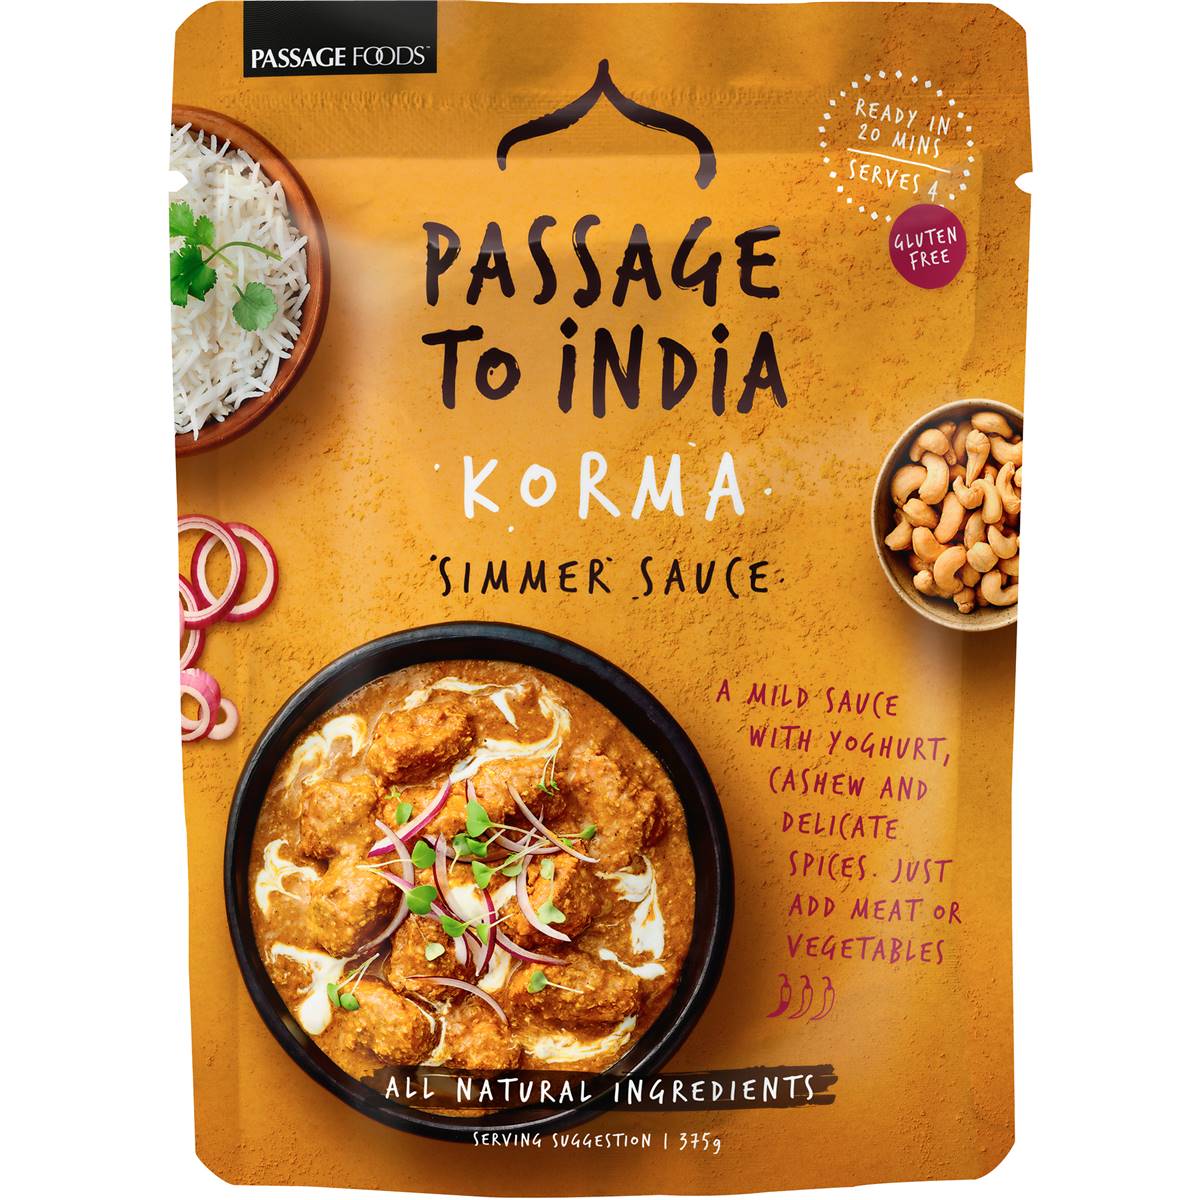 Passage To Asia Passage To India Simmer Sauce Curry Korma 375g